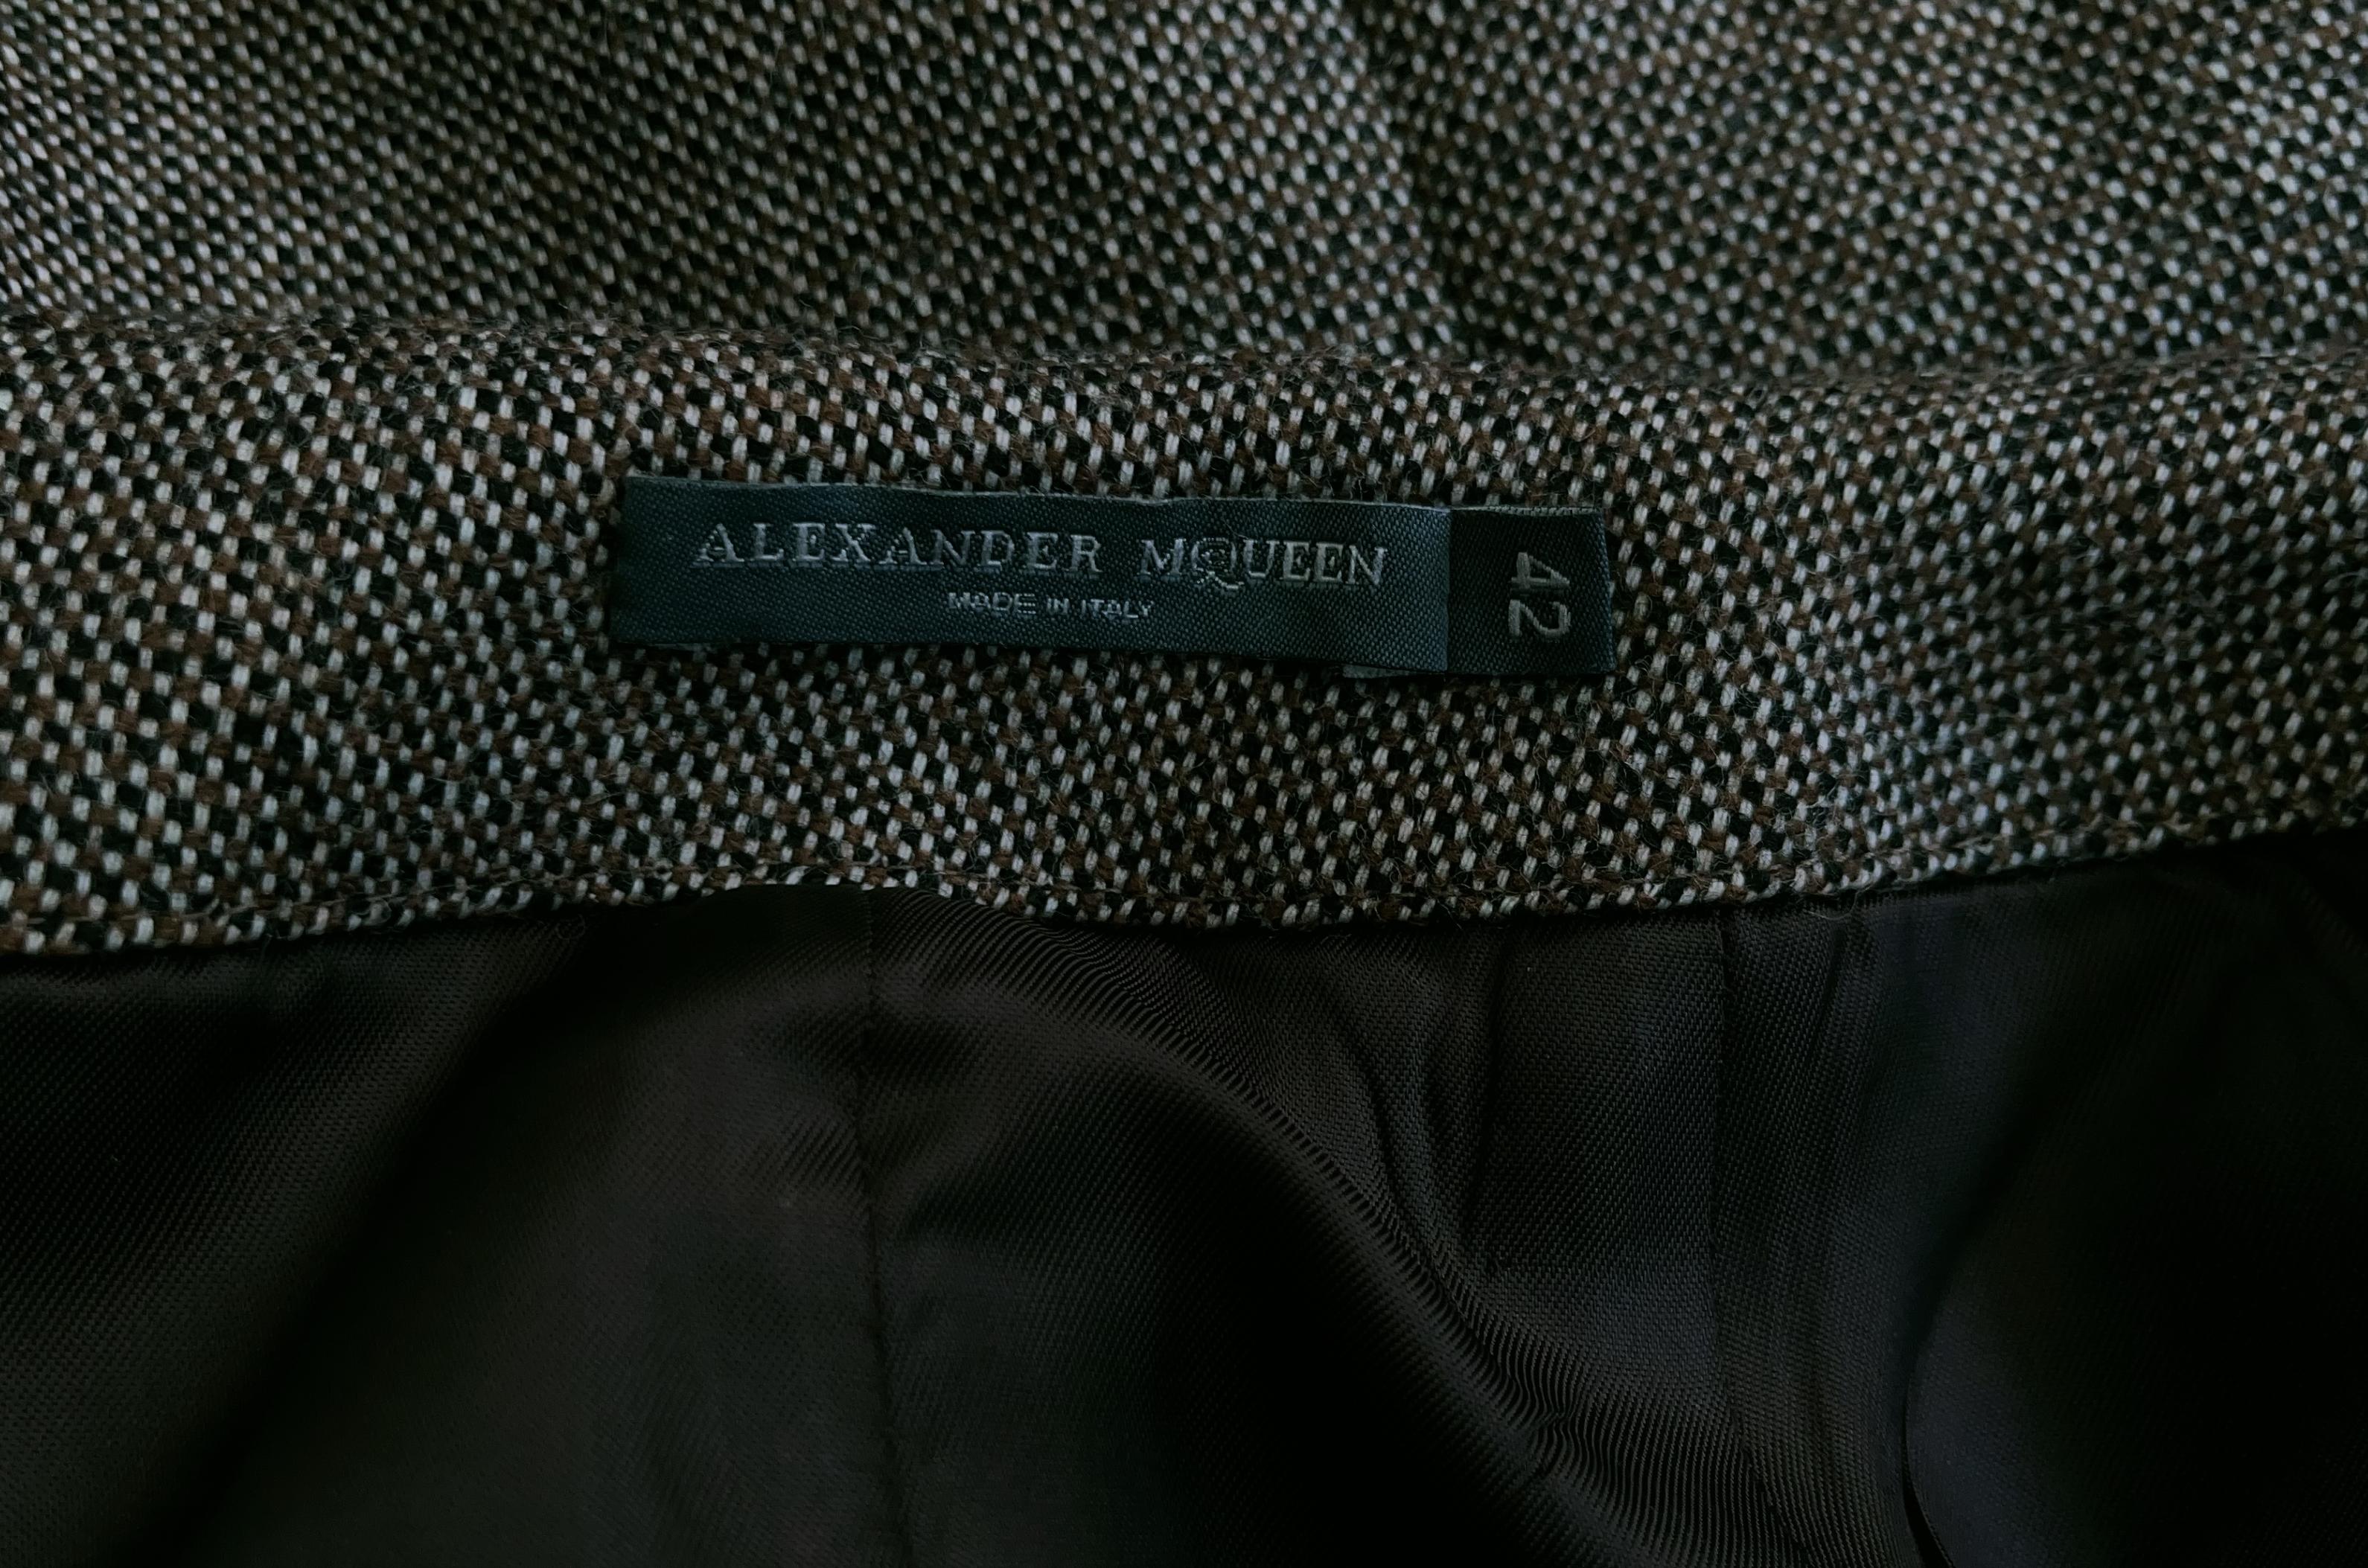 Alexander McQueen Archival FW 2005 'The Man Who Knew Too Much' Wool Skirt Suit For Sale 8